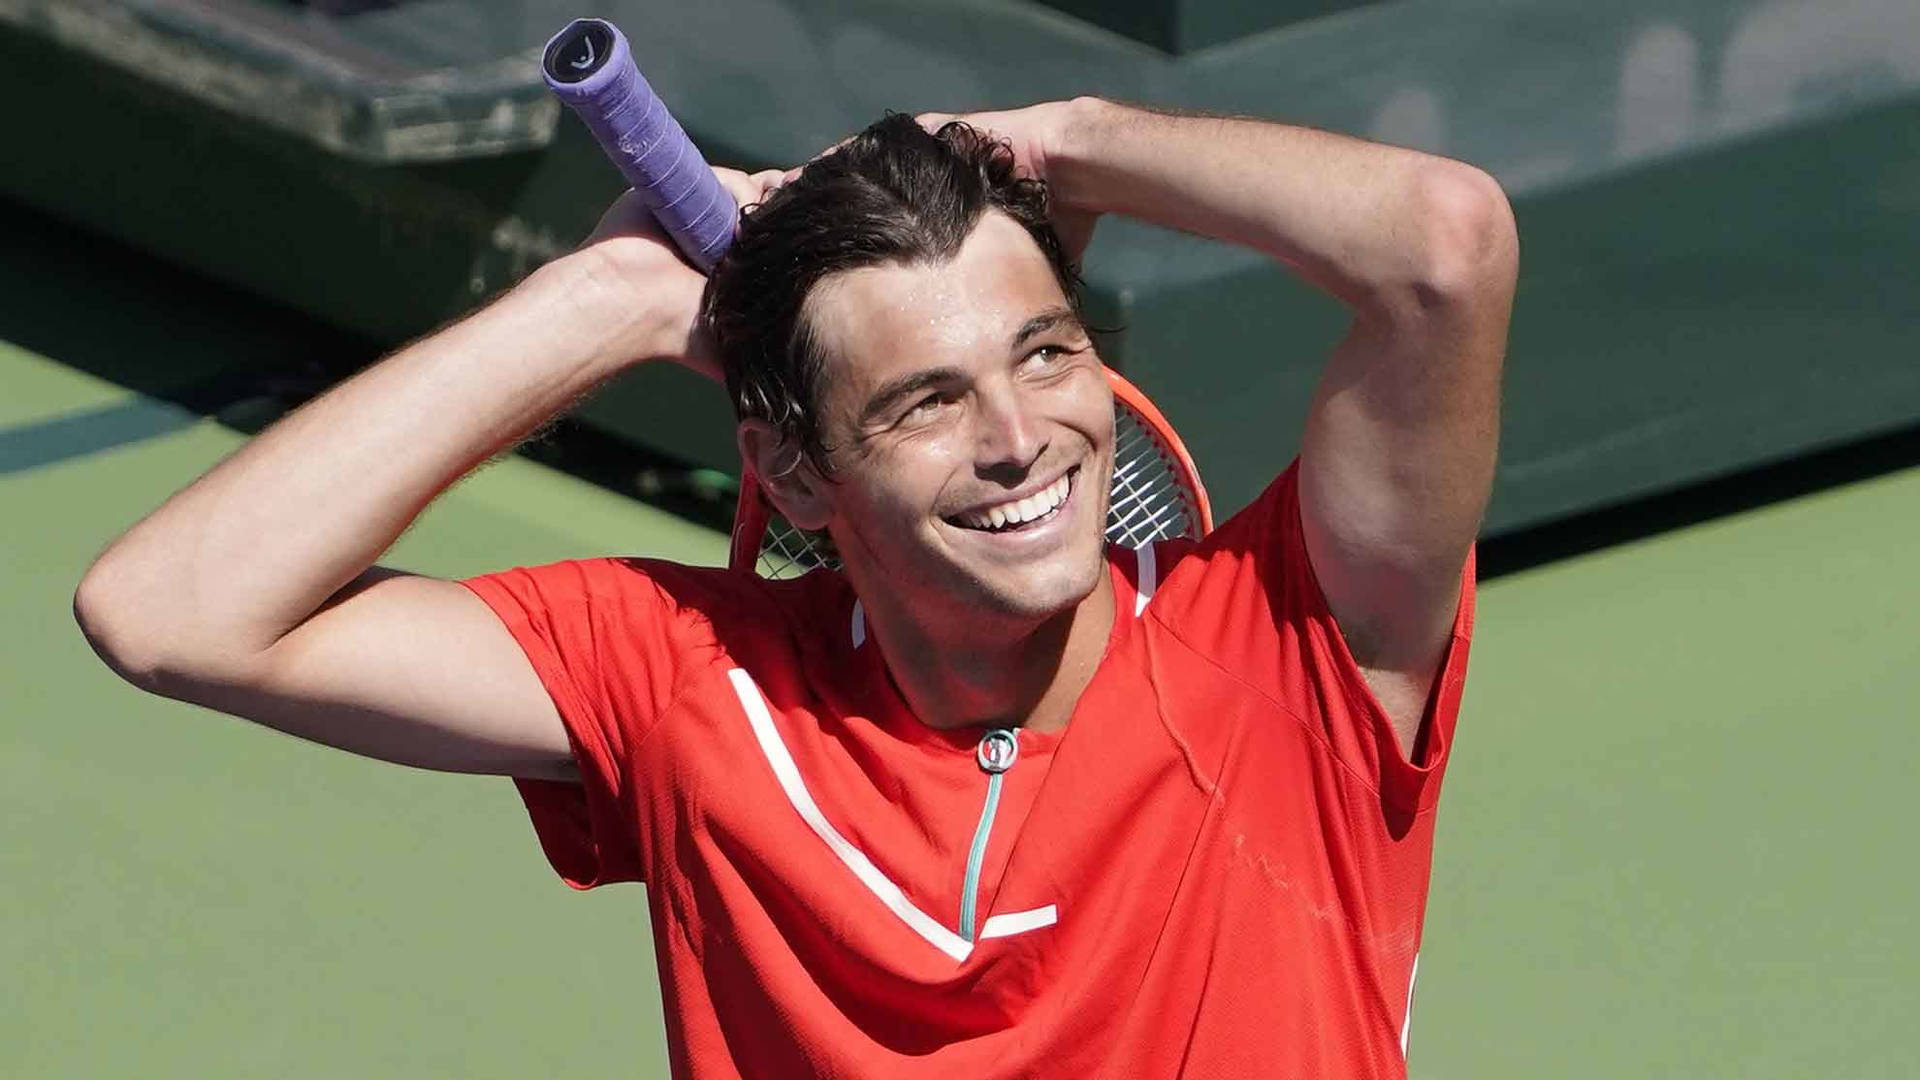 Taylor Fritz In Red Shirt